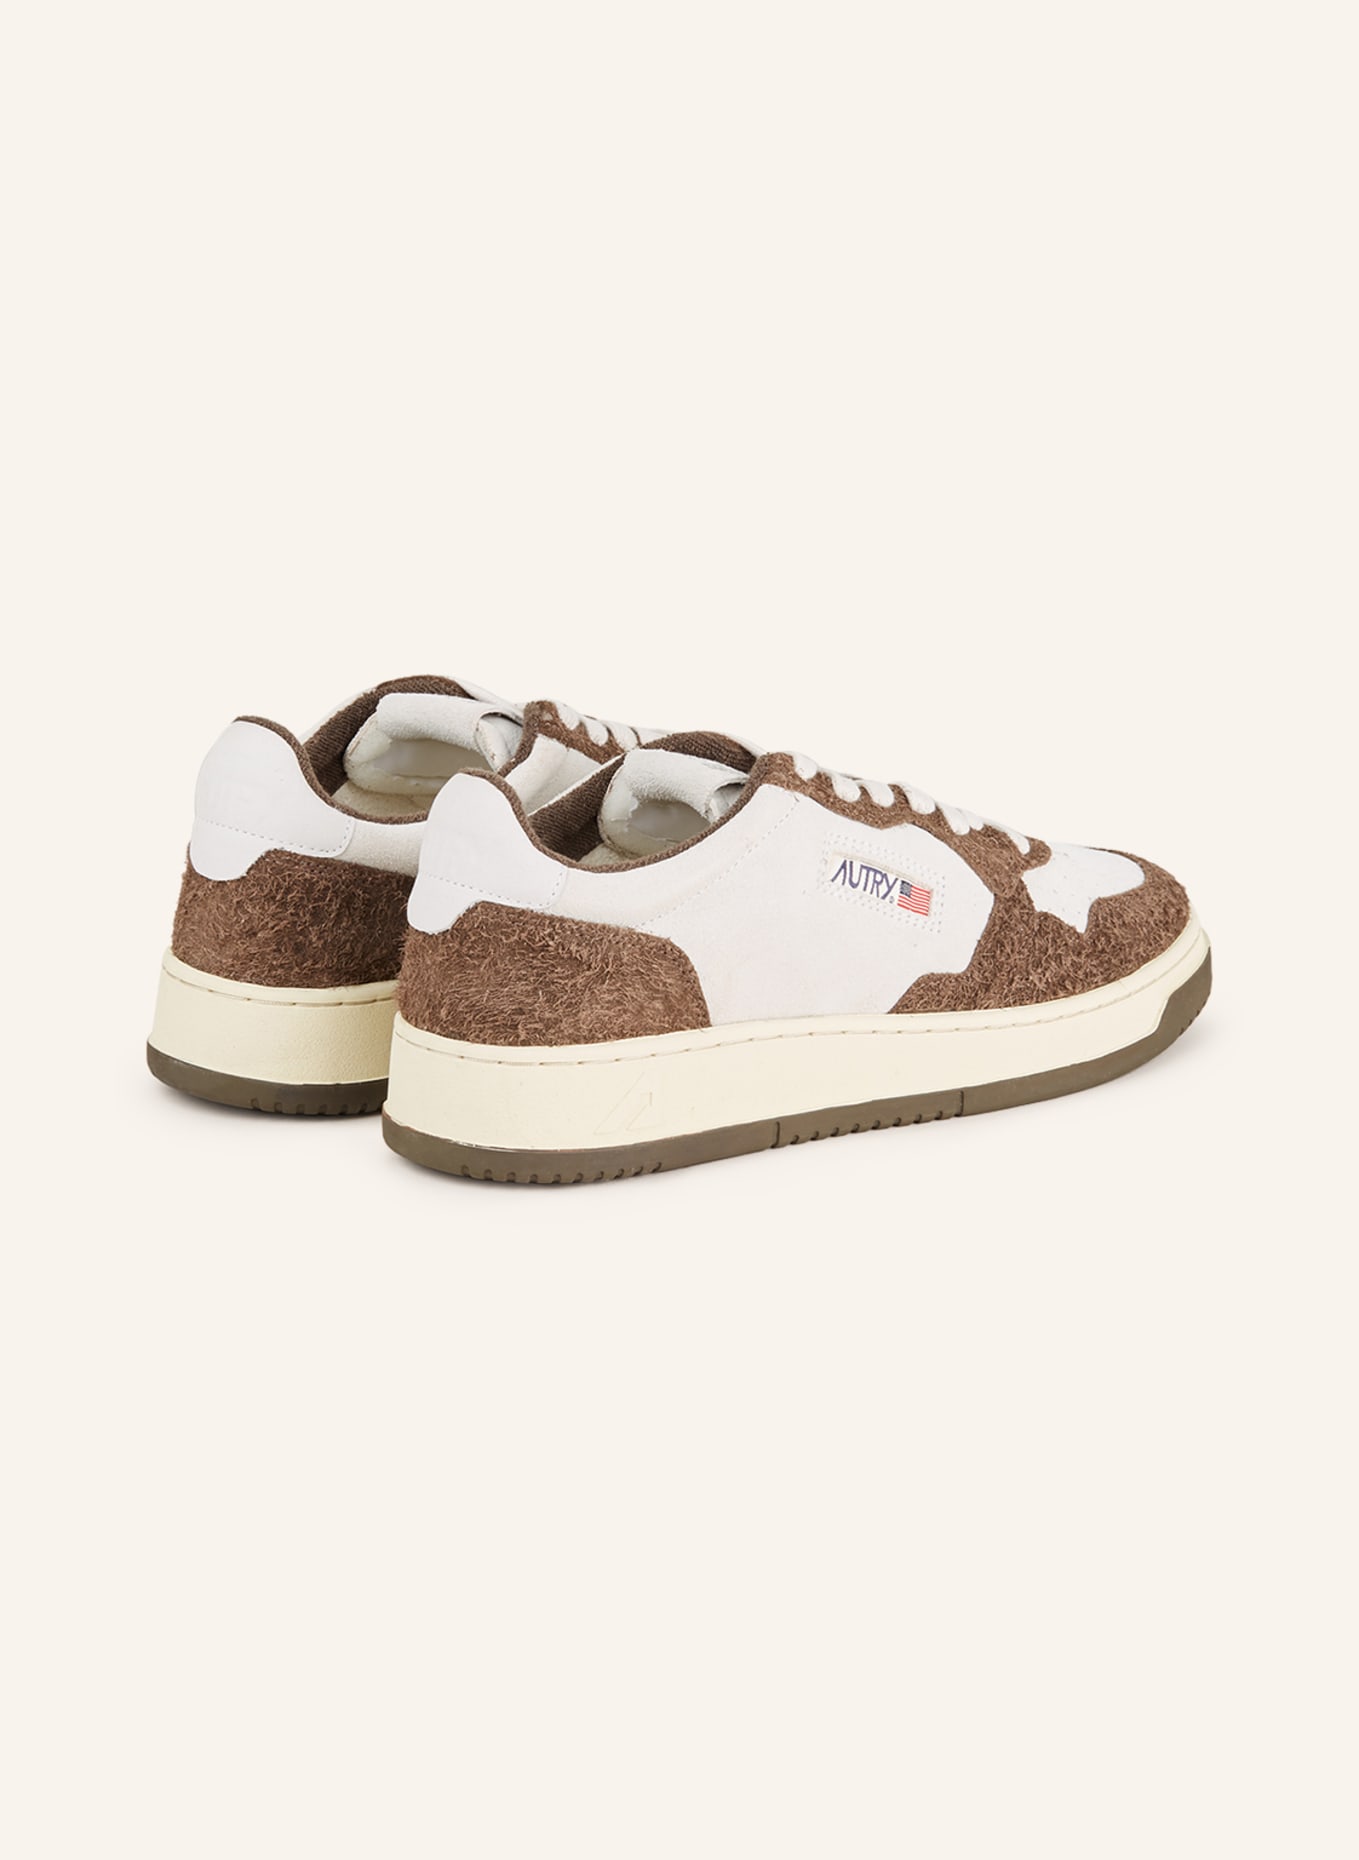 AUTRY Sneakers AUTRY 01, Color: LIGHT GRAY/ BROWN (Image 2)